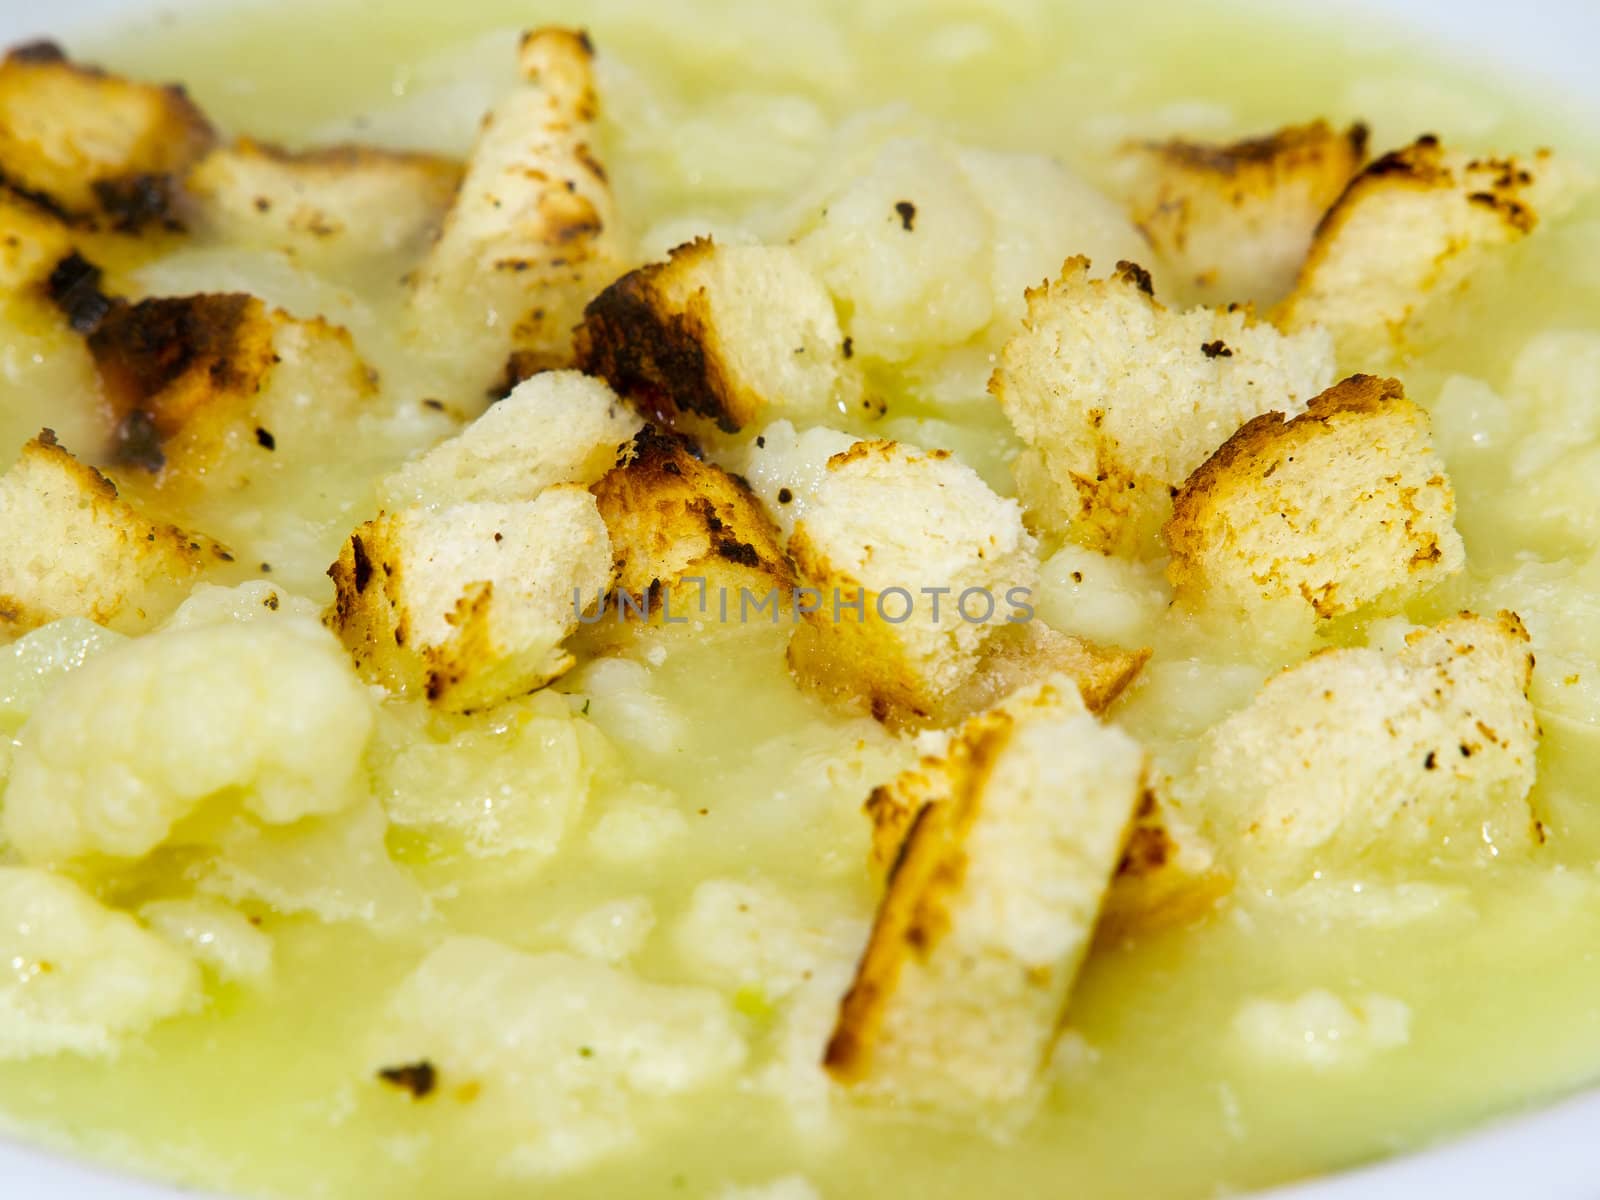 cauliflower soup by nevenm